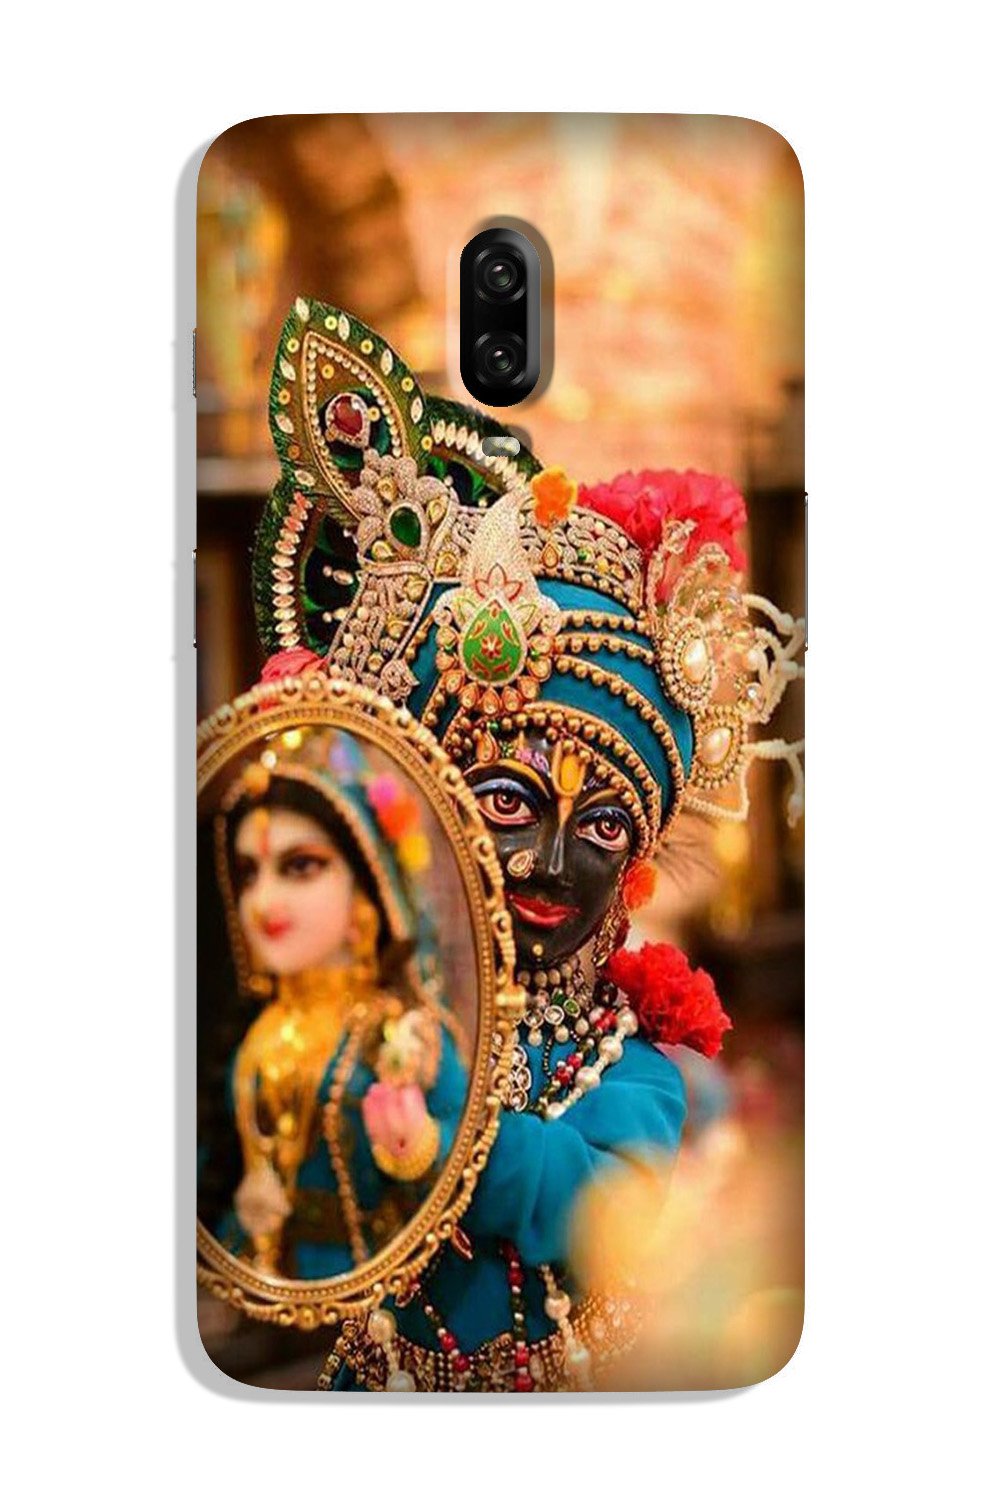 Lord Krishna5 Case for OnePlus 6T